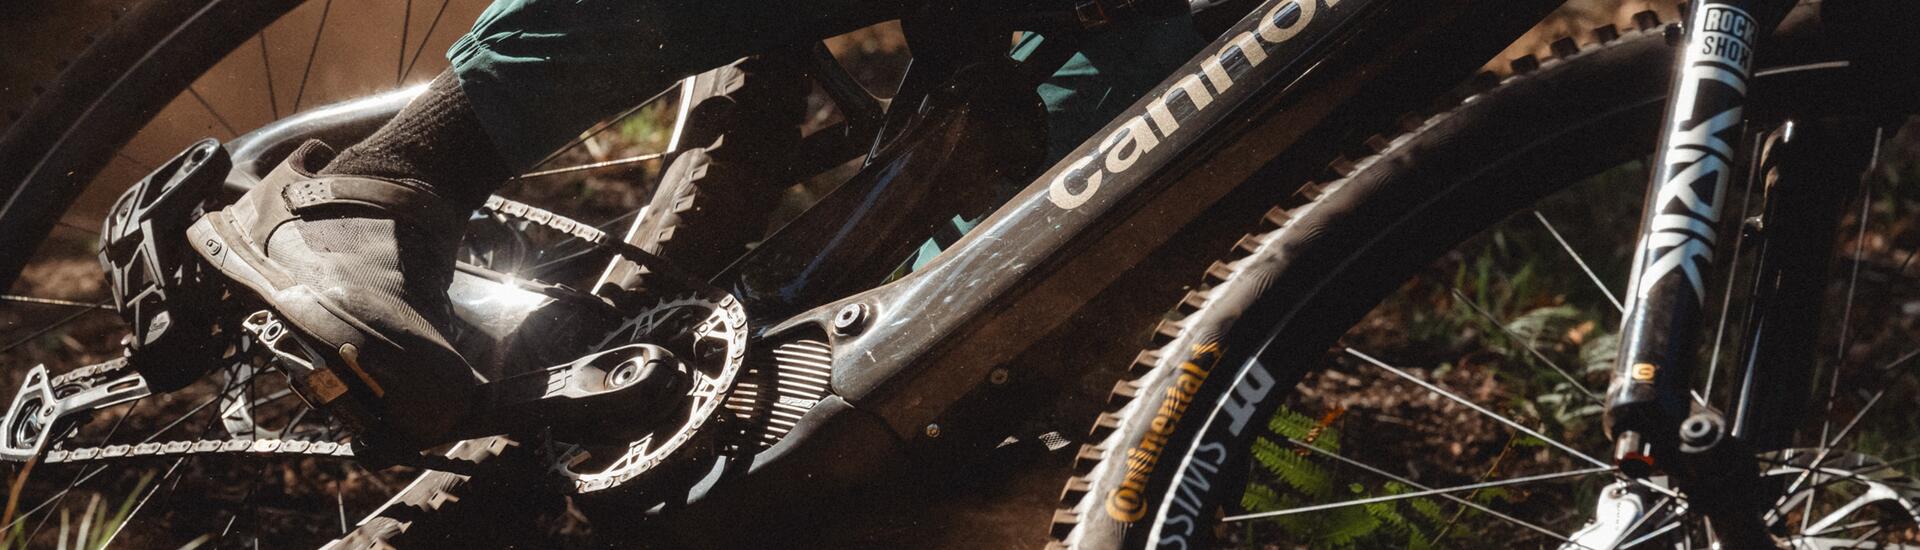 Cannondale Launches the All-New Moterra SL: The Lightest Full-Power Mountain Bike Ever* 